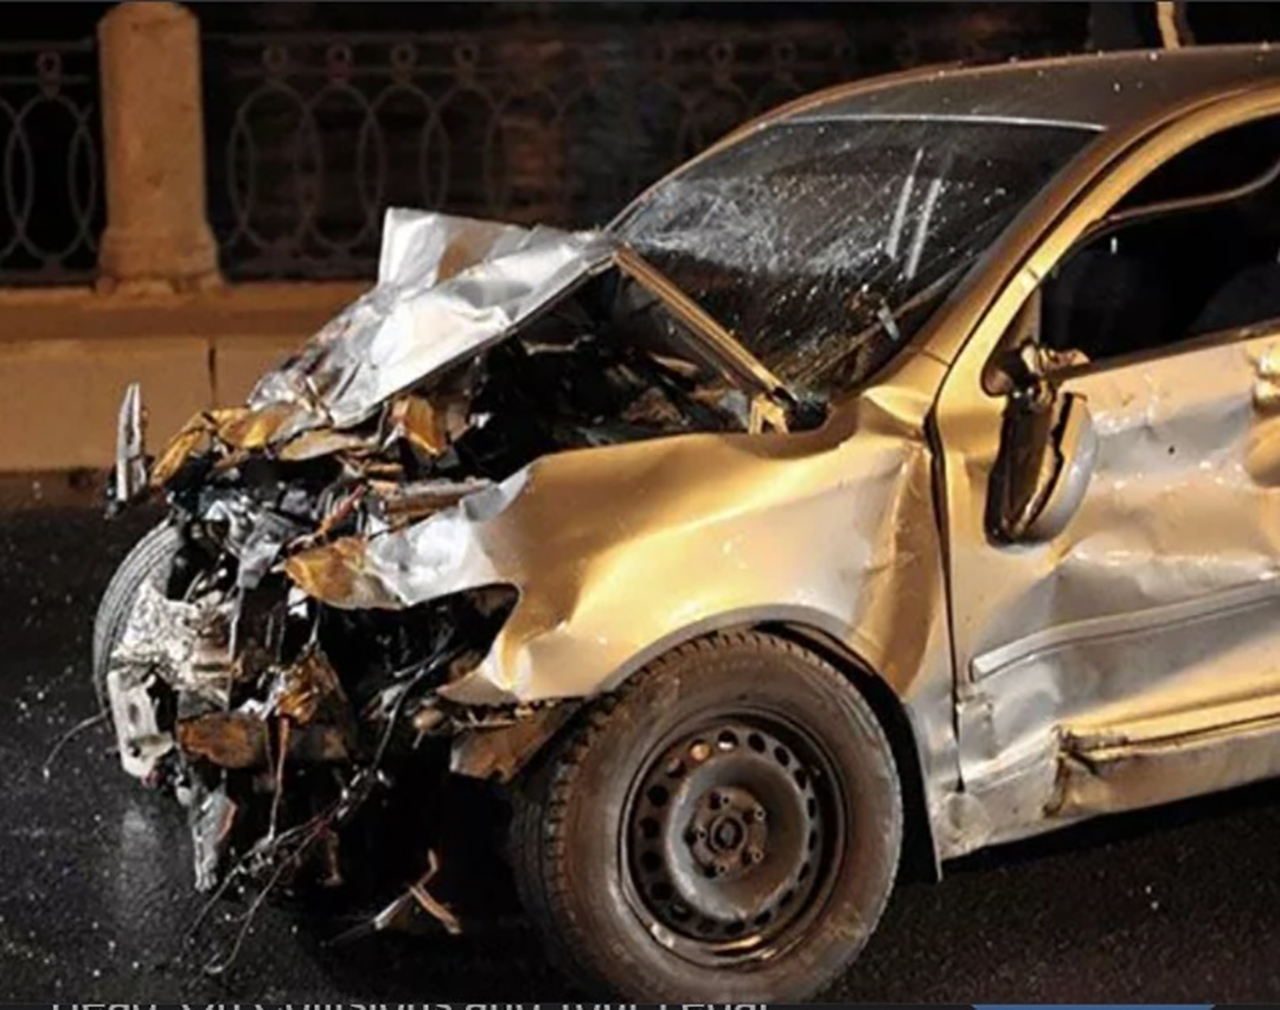 Shocking: Two Separate Head-on Collisions Claim Nine Lives 1